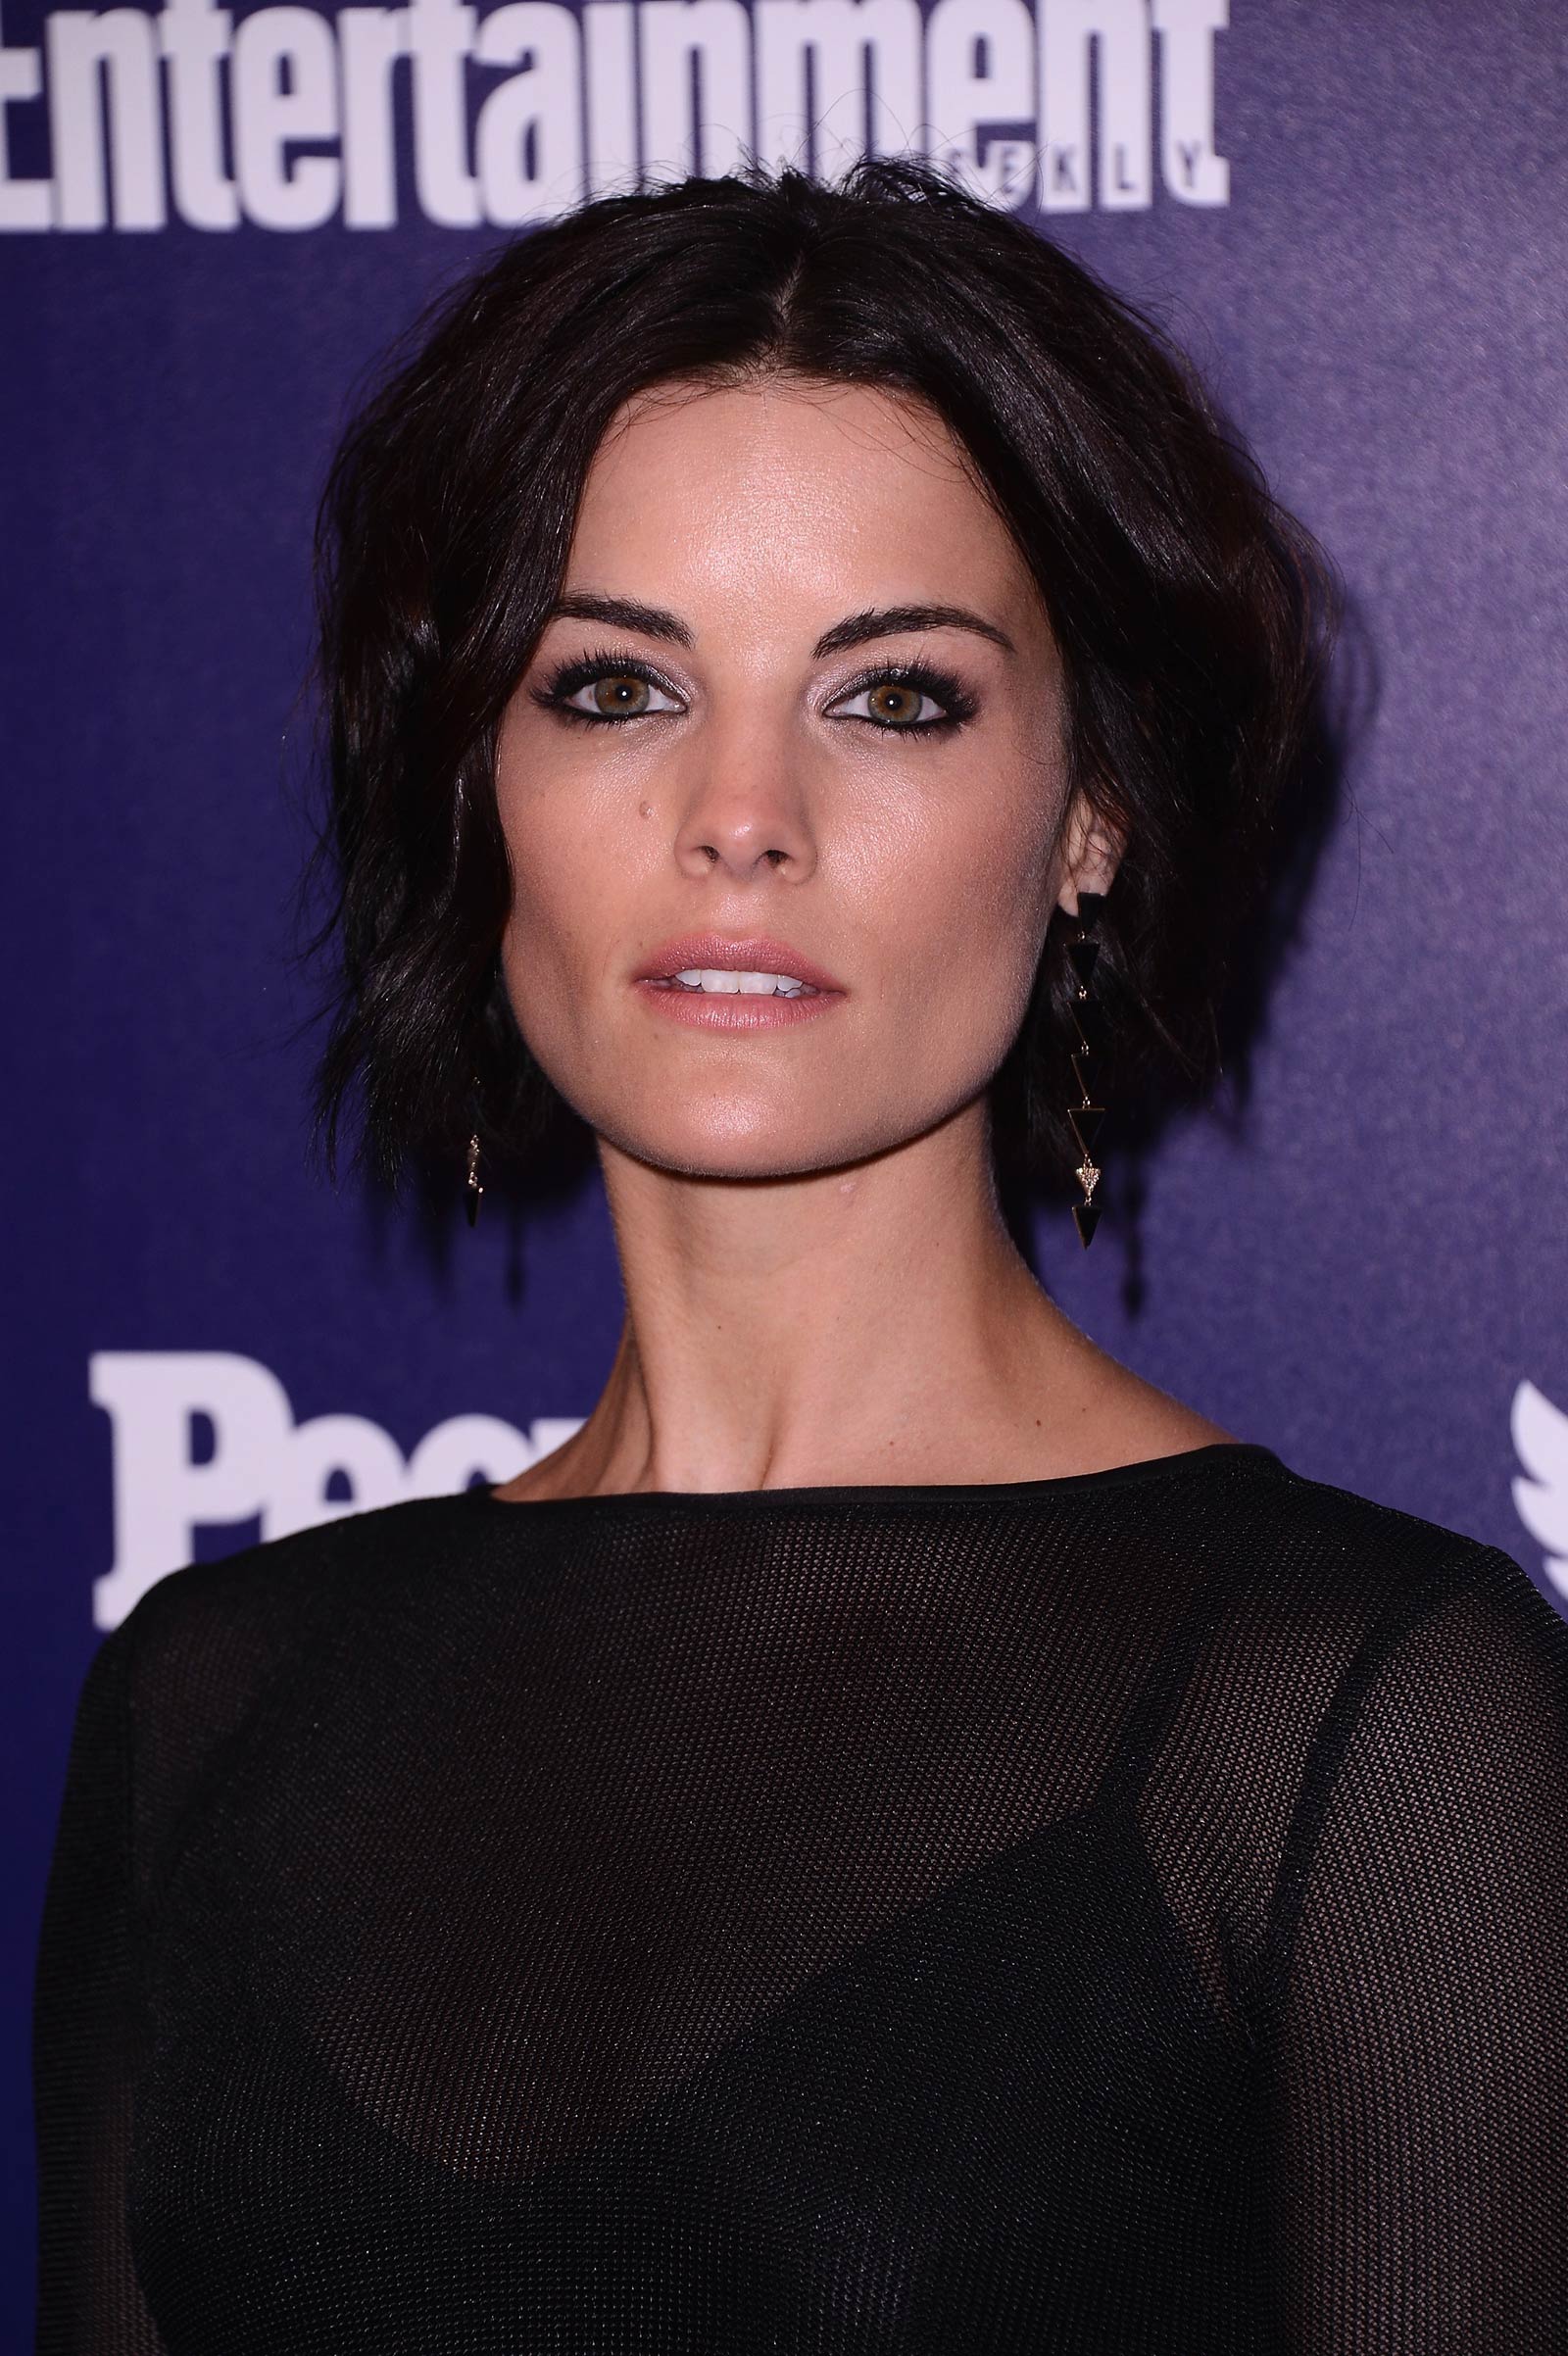 Jaimie Alexander attends New York UpFronts Party